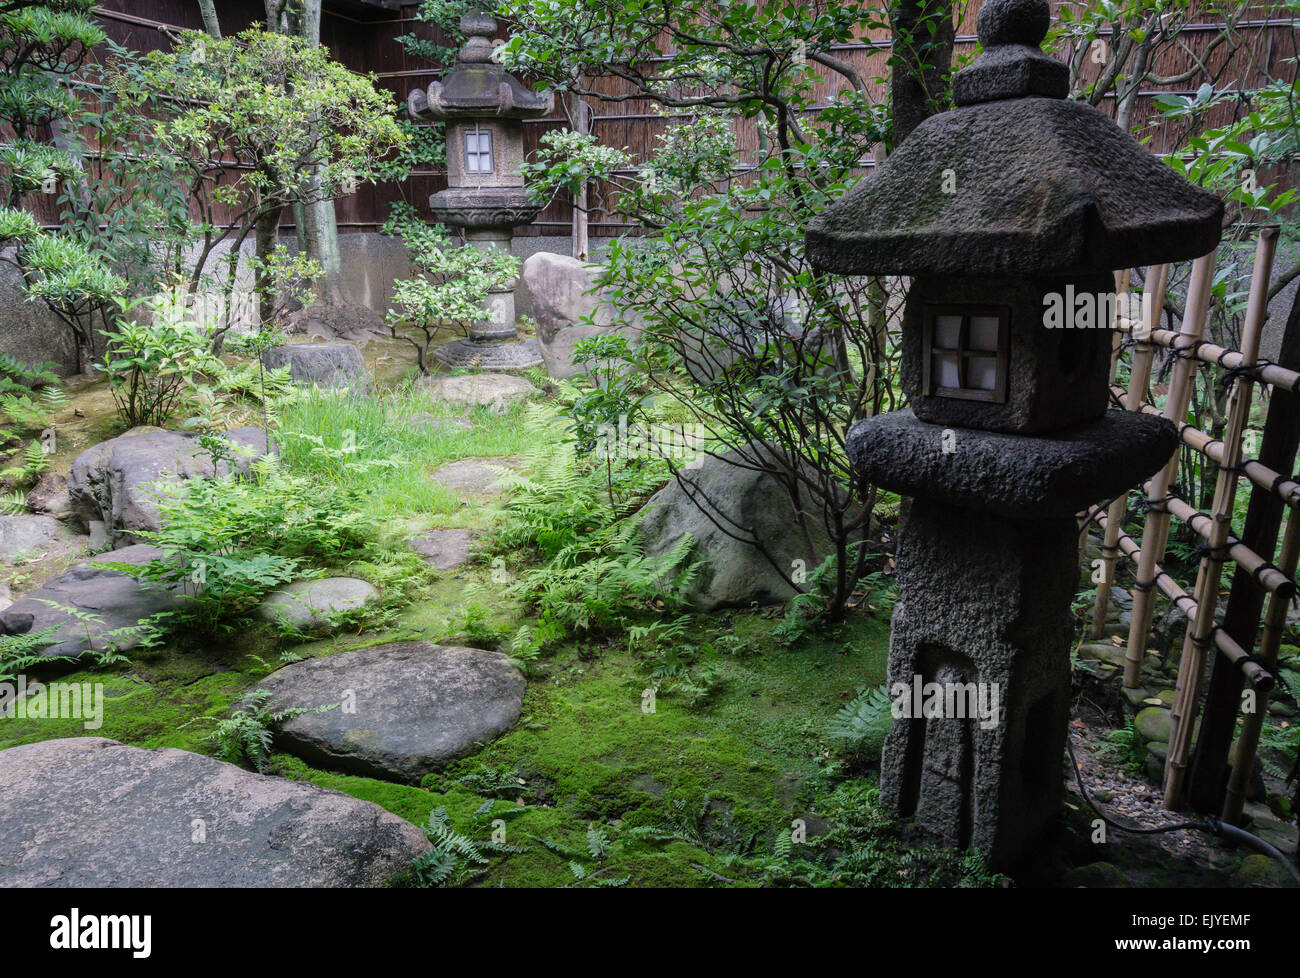 View of a traditional Japanese garden with old lantern in Kyoto, Japan Stock Photo